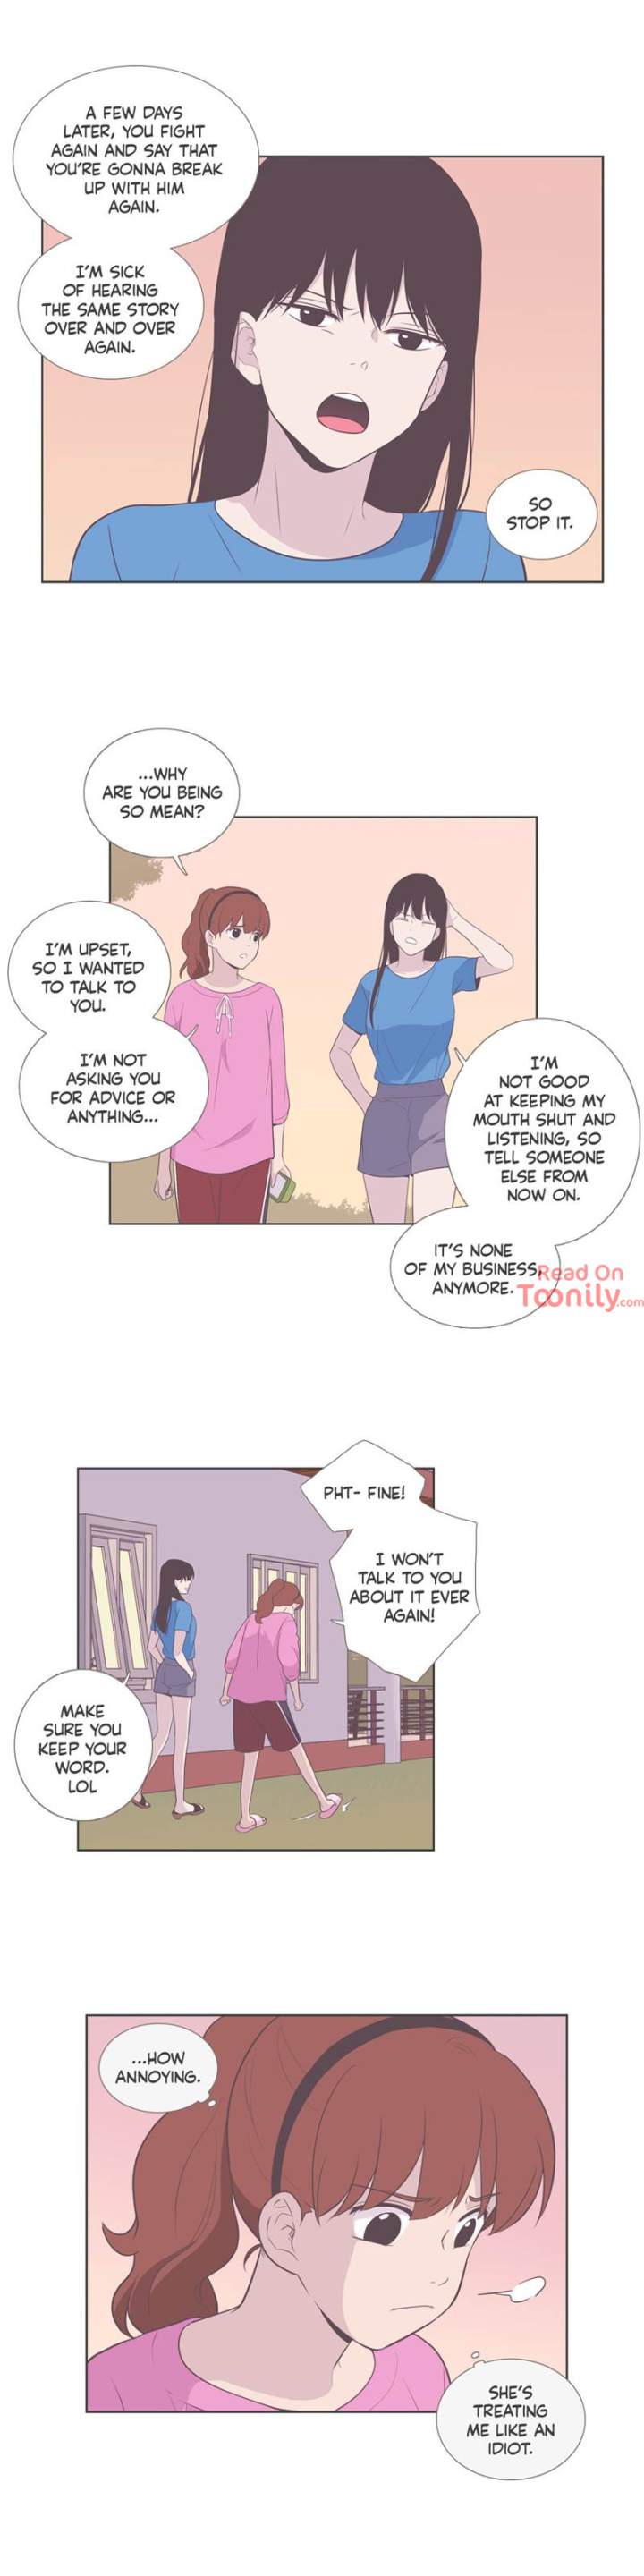 Something About Us - Chapter 83 Page 18